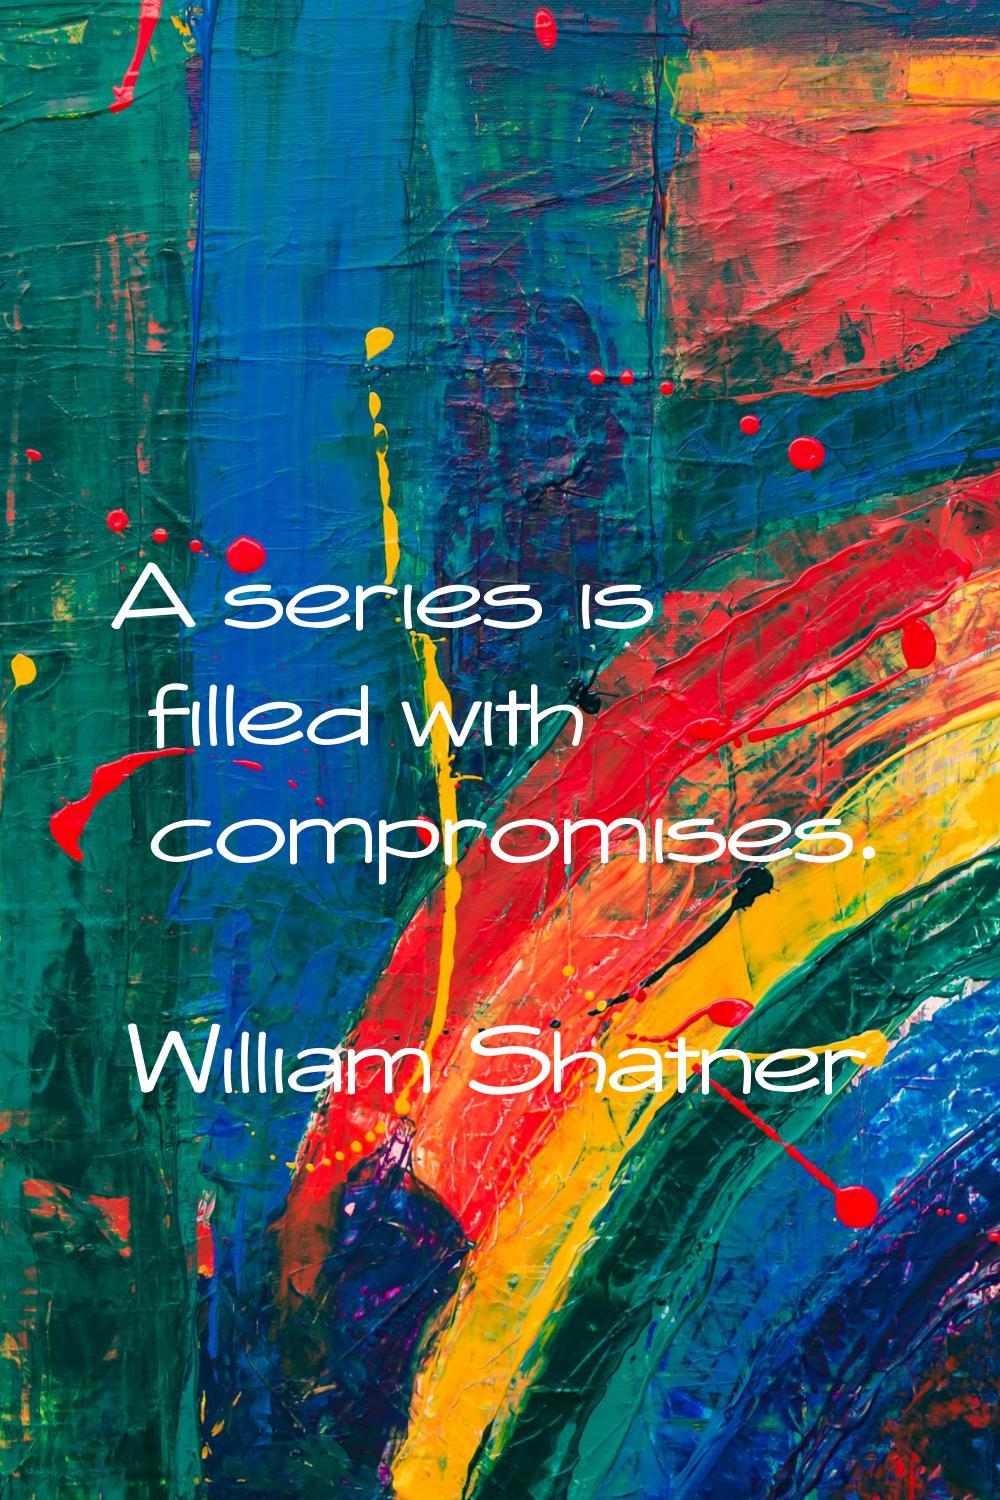 A series is filled with compromises.